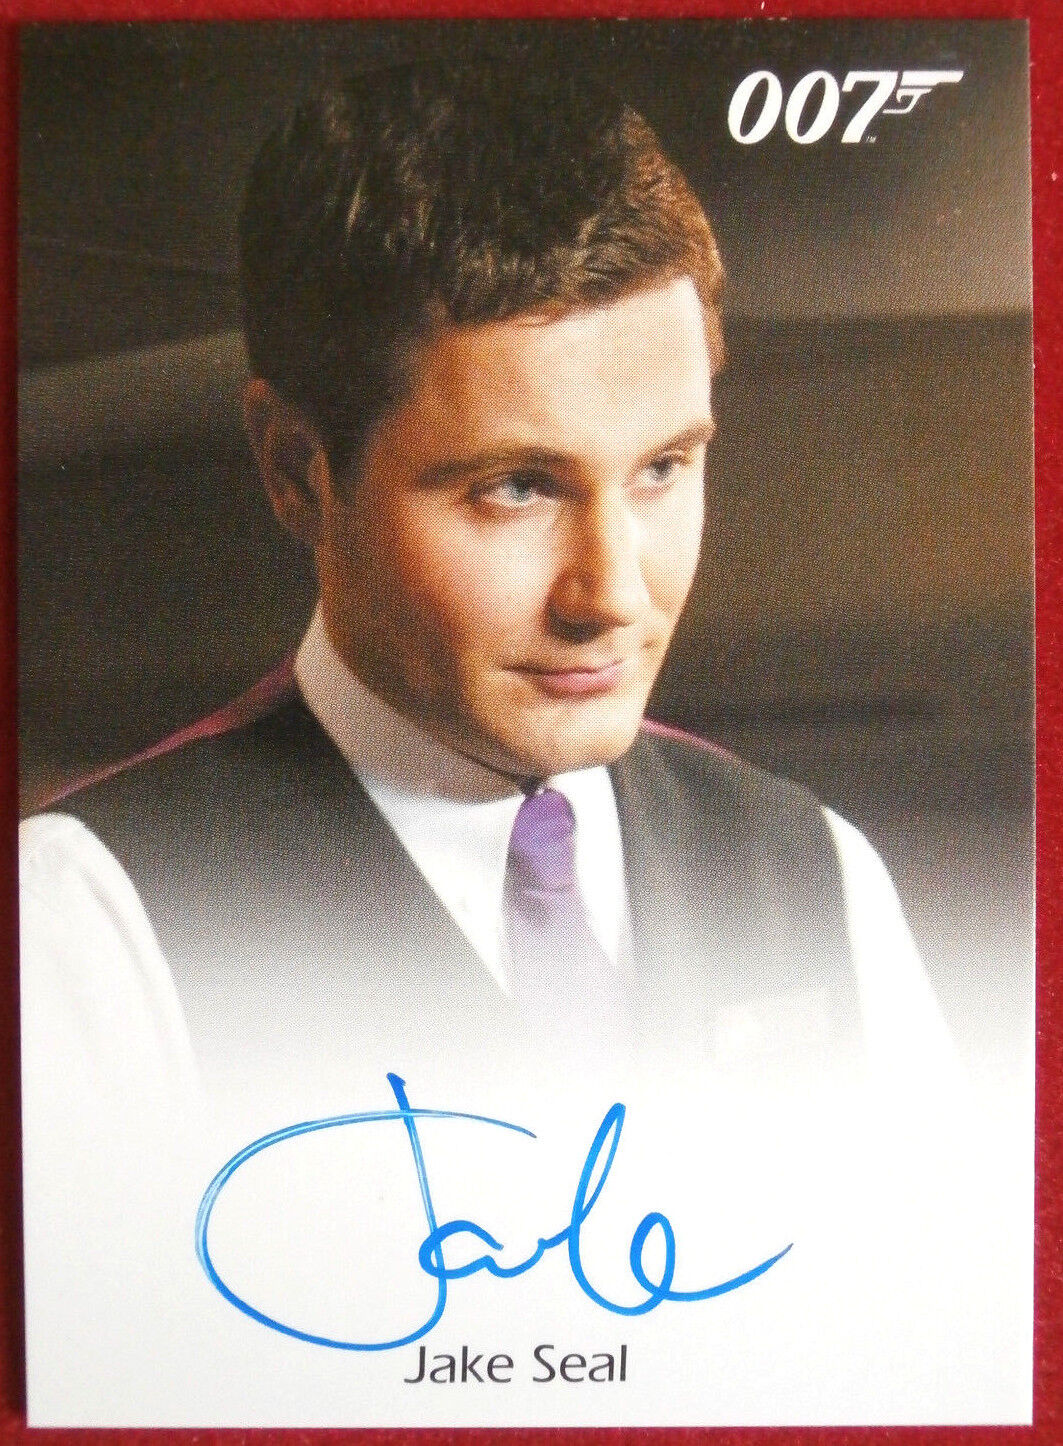 JAMES BOND - Quantum of Solace - JAKE SEAL - Hand-Signed Autograph Card